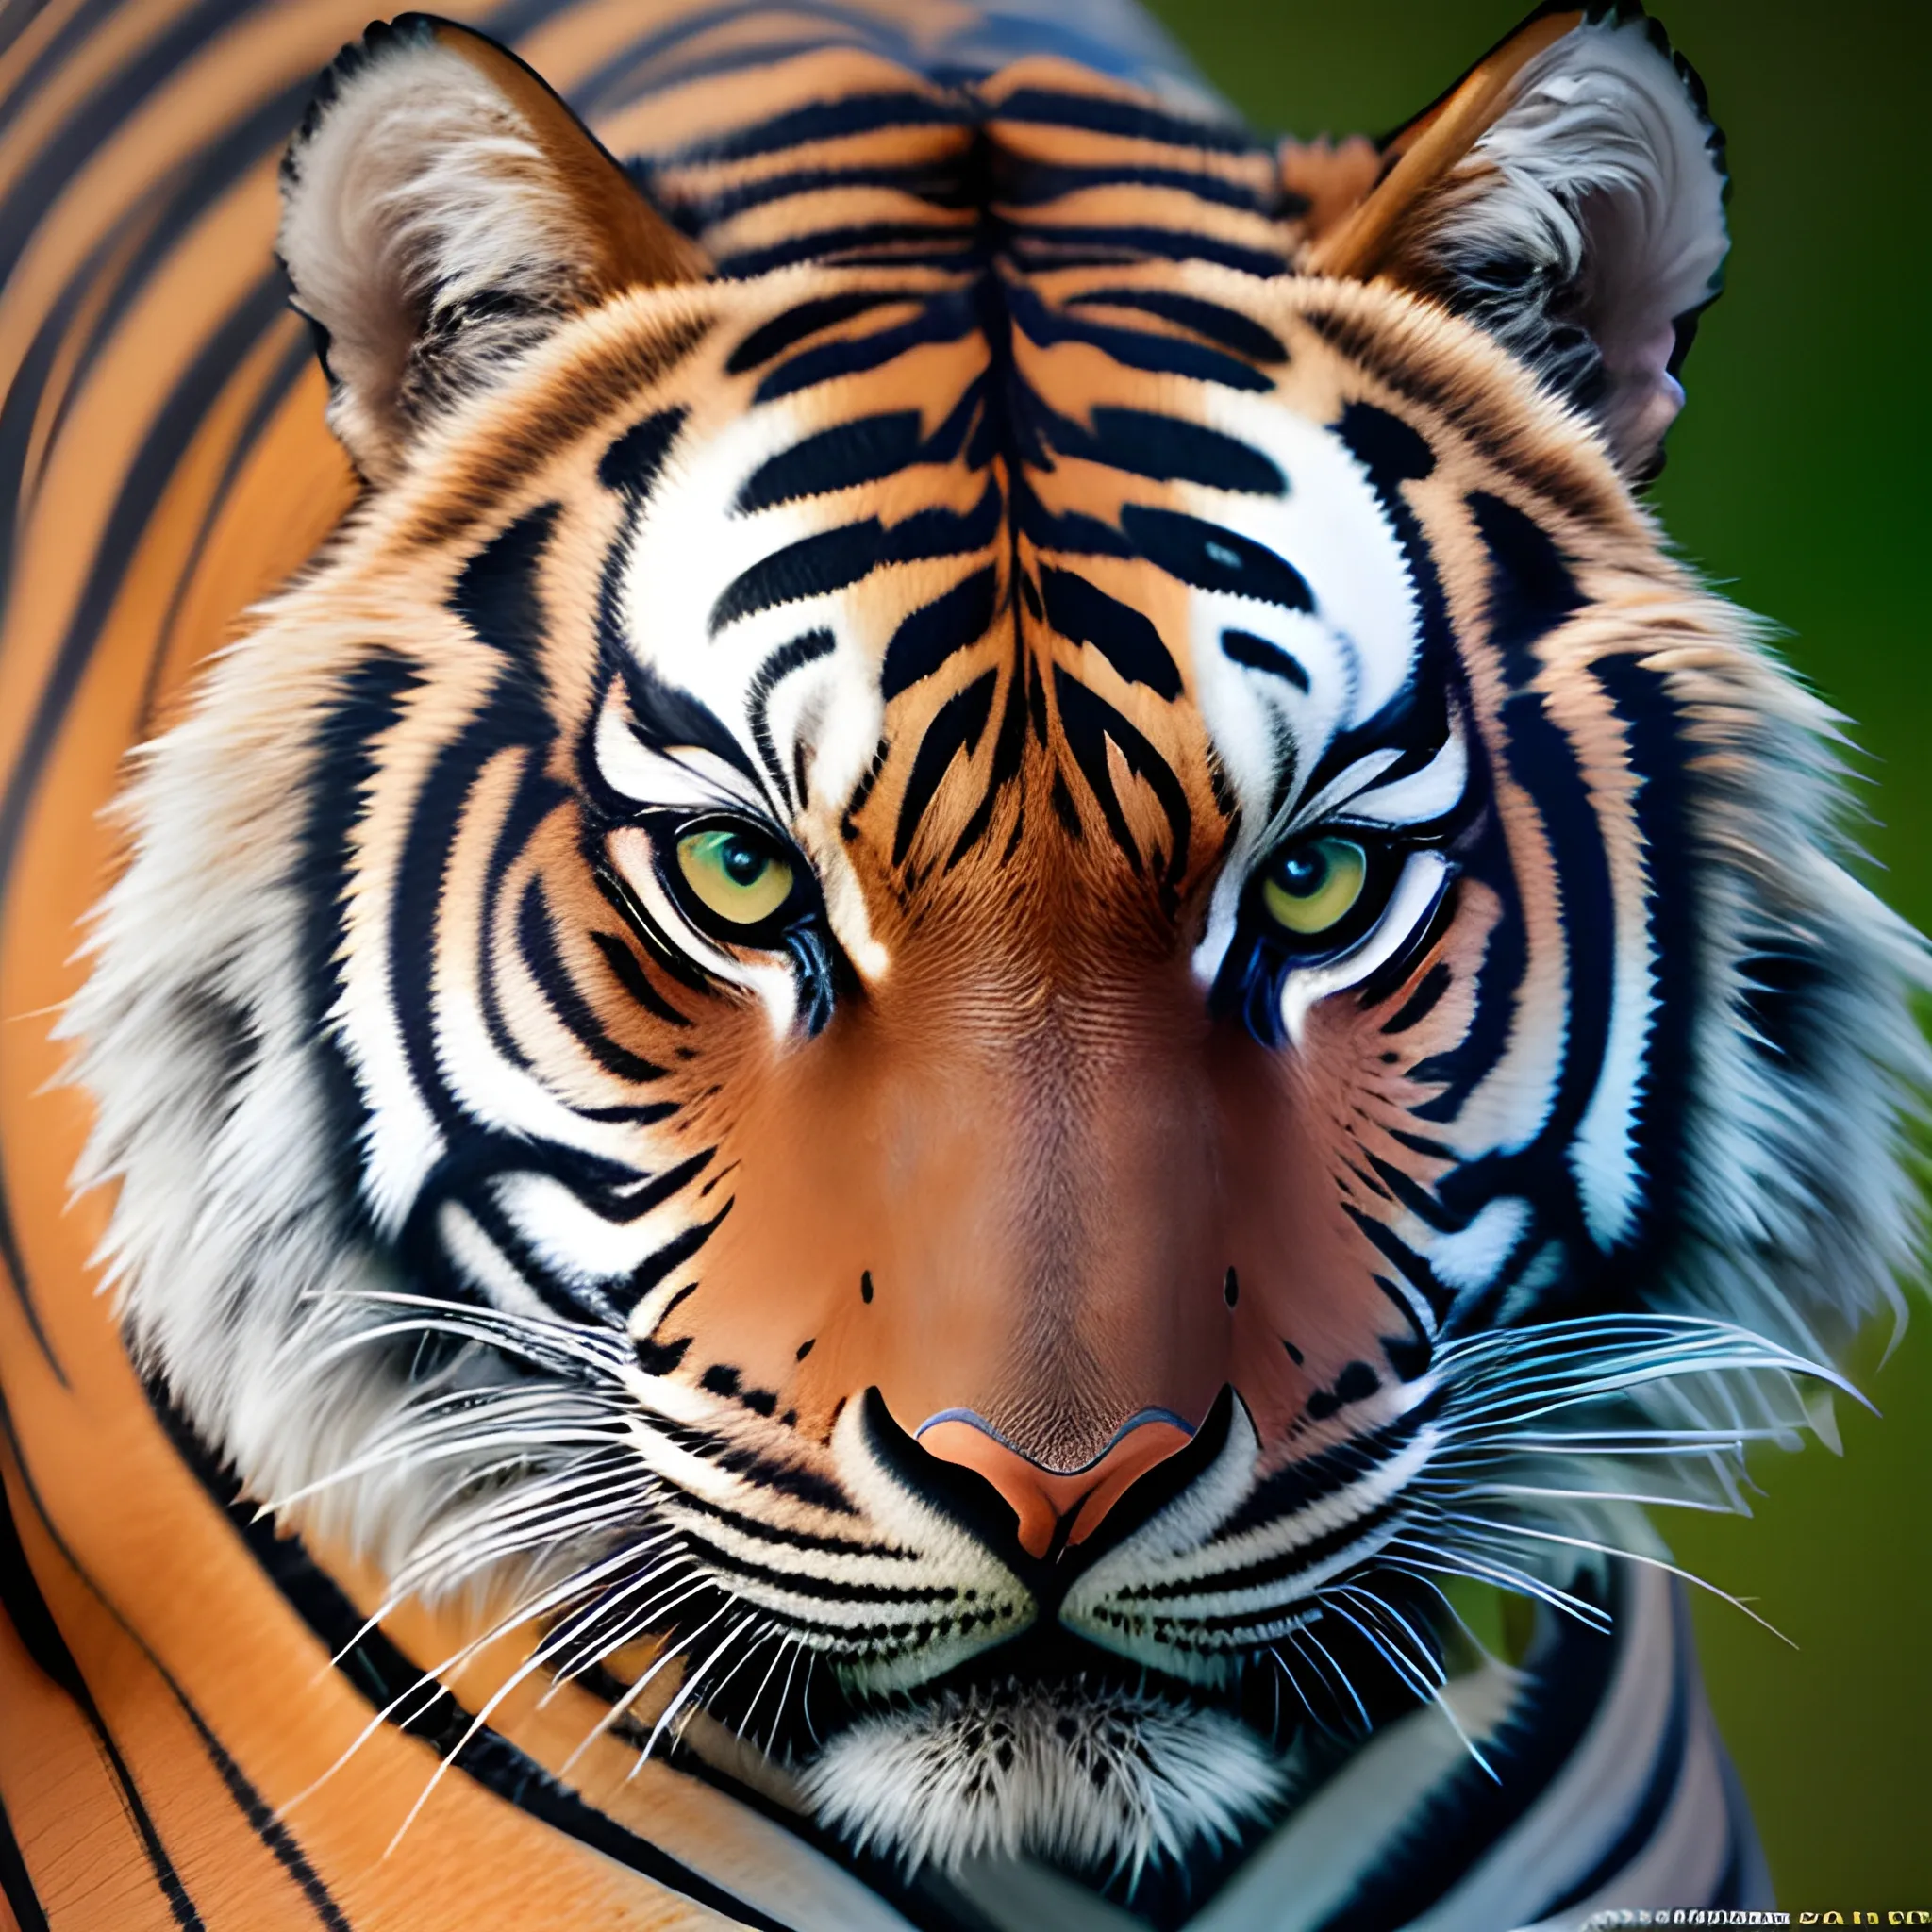 
a tigre, shot with Sony Alpha a9 II and Sony FE 200-600mm f/5.6-6.3 G OSS lens, natural ligh, hyper realistic photograph, ultra detailed –ar 3:2 –q 2 –s 750

